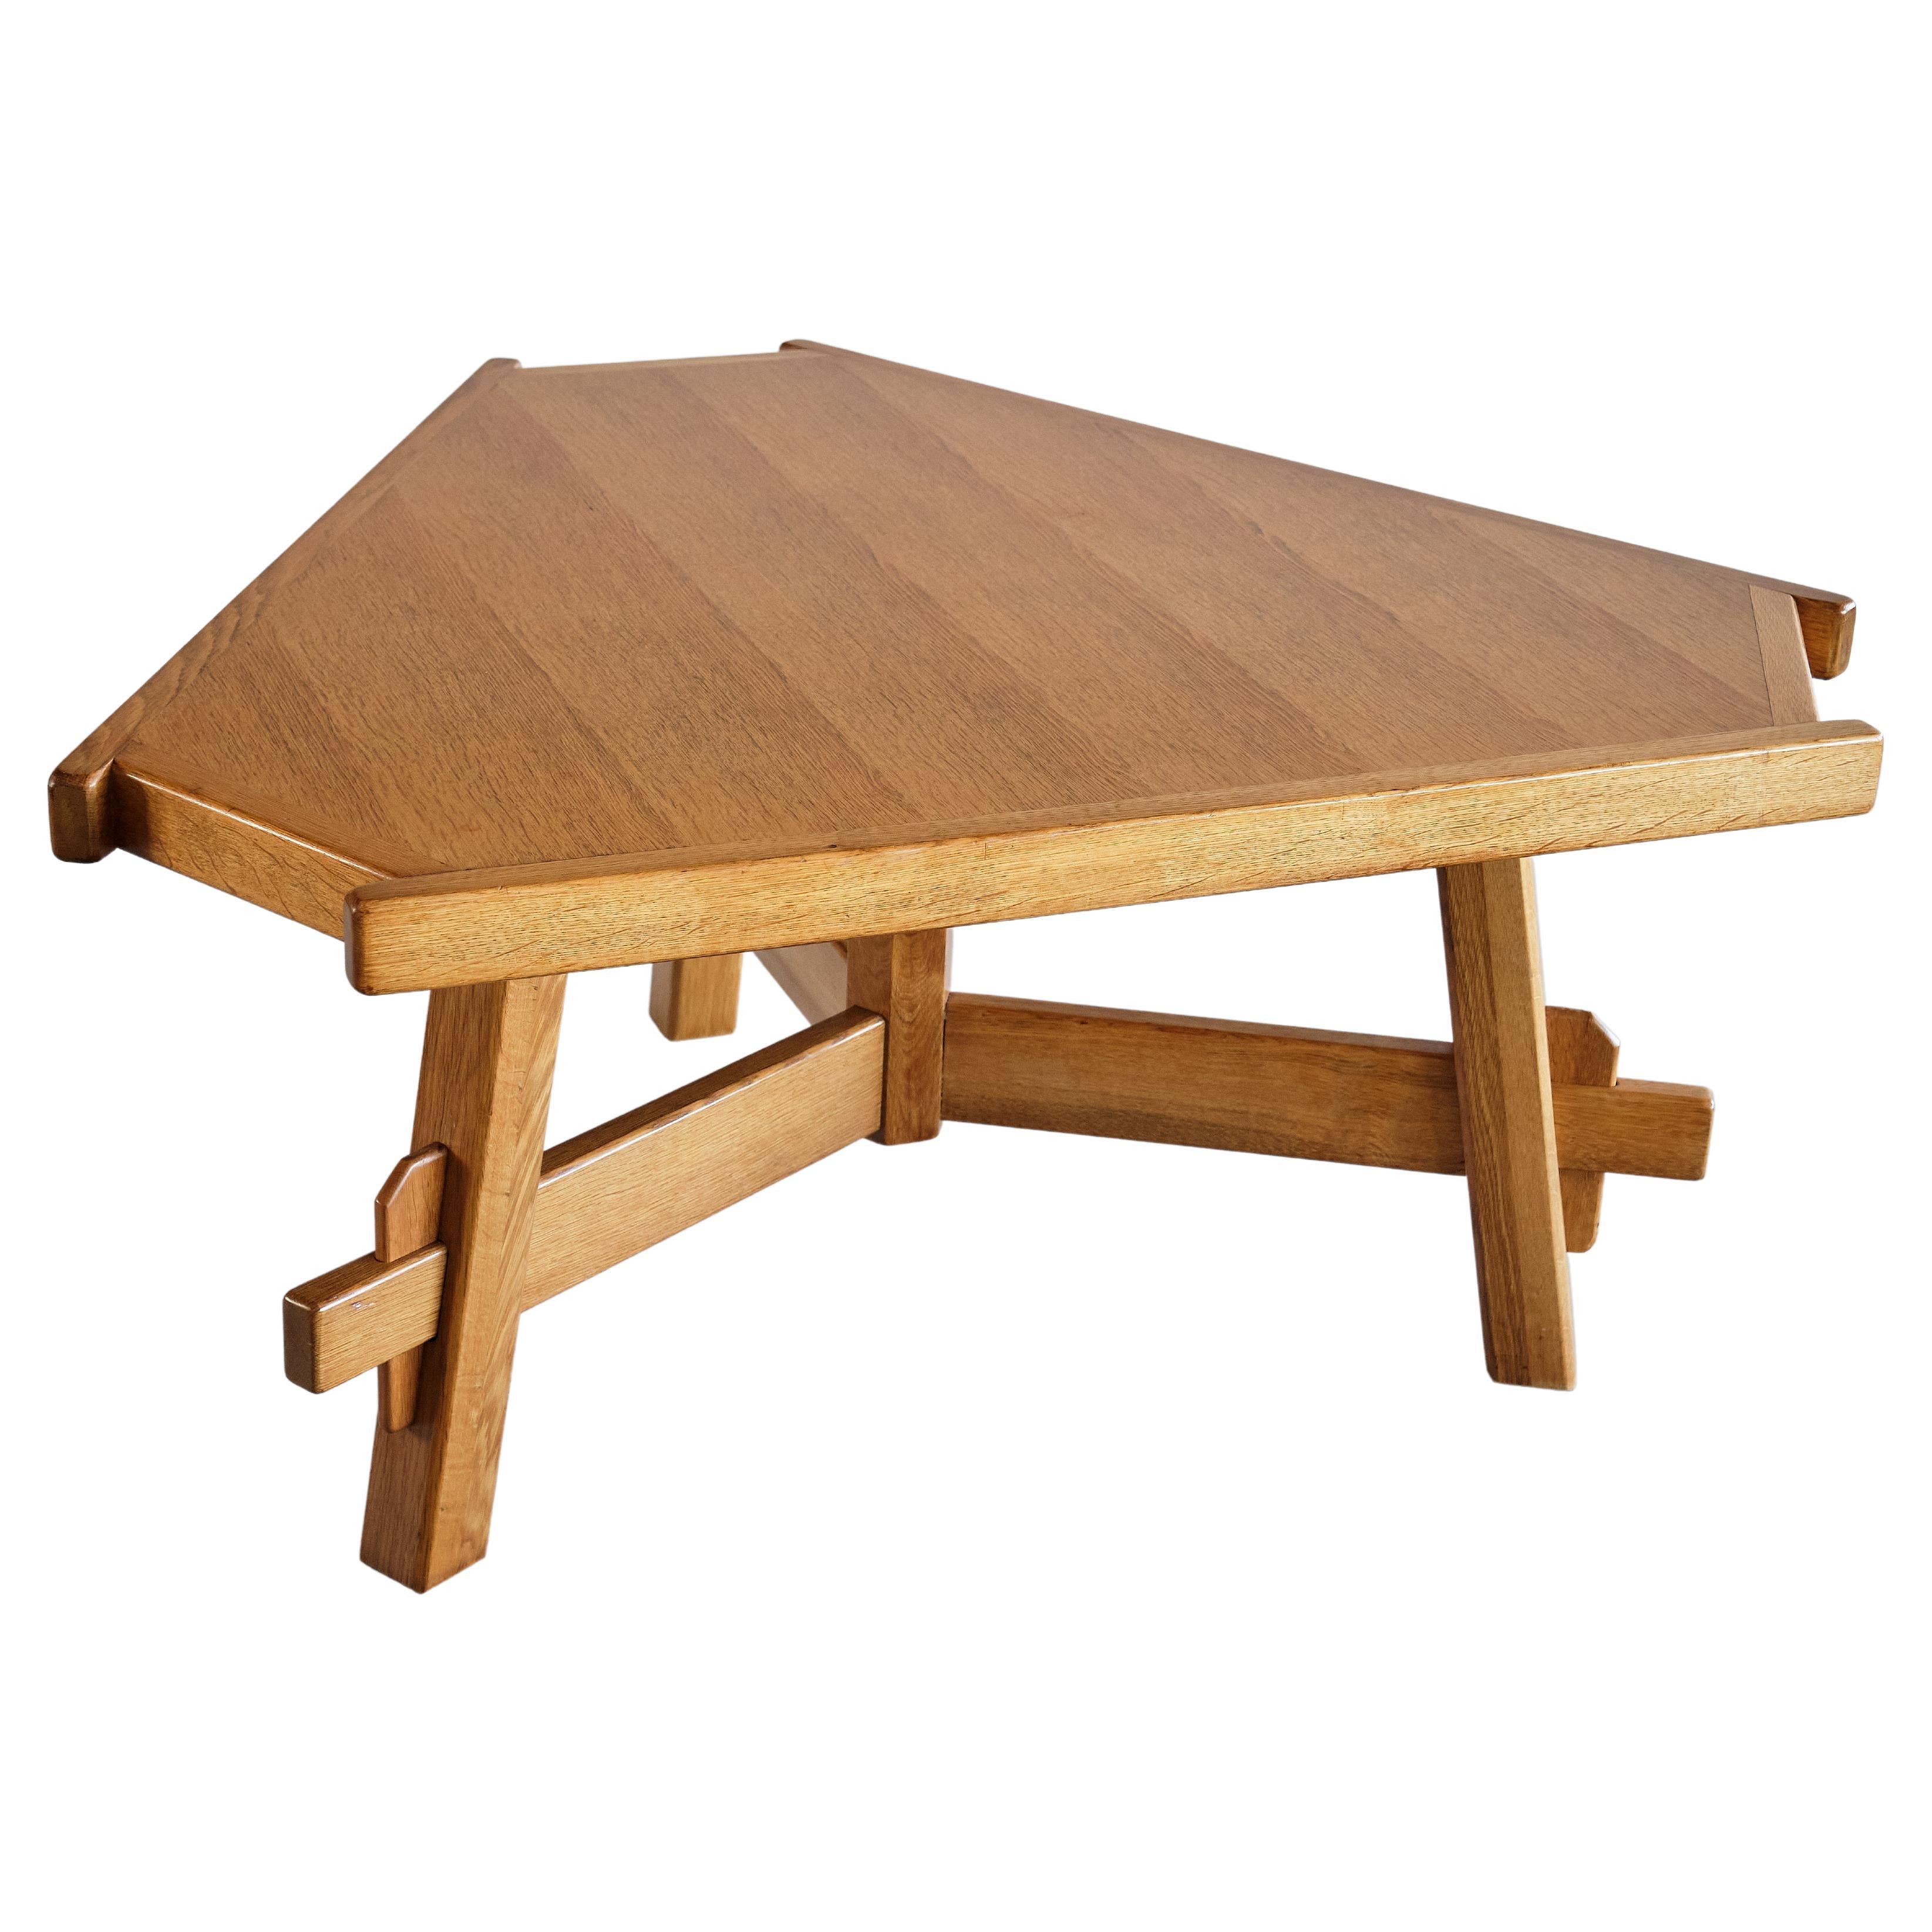 Triangular French Modern Dining Table in Solid Oak Wood, France, 1960s For Sale